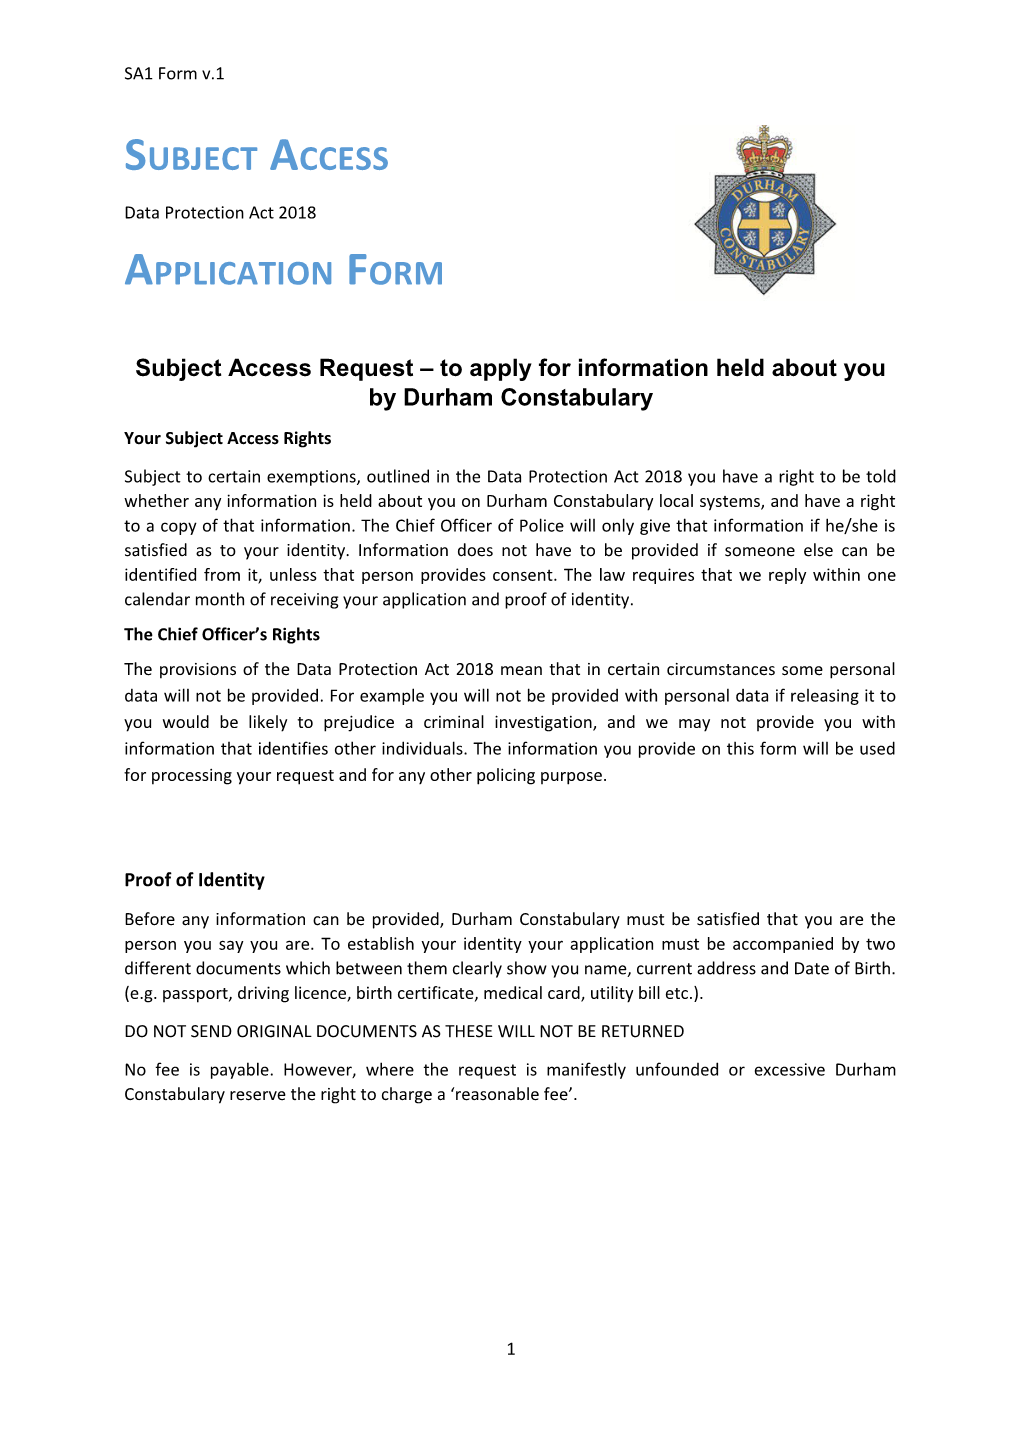 Subject Access Request to Apply for Information Held About You by Durham Constabulary